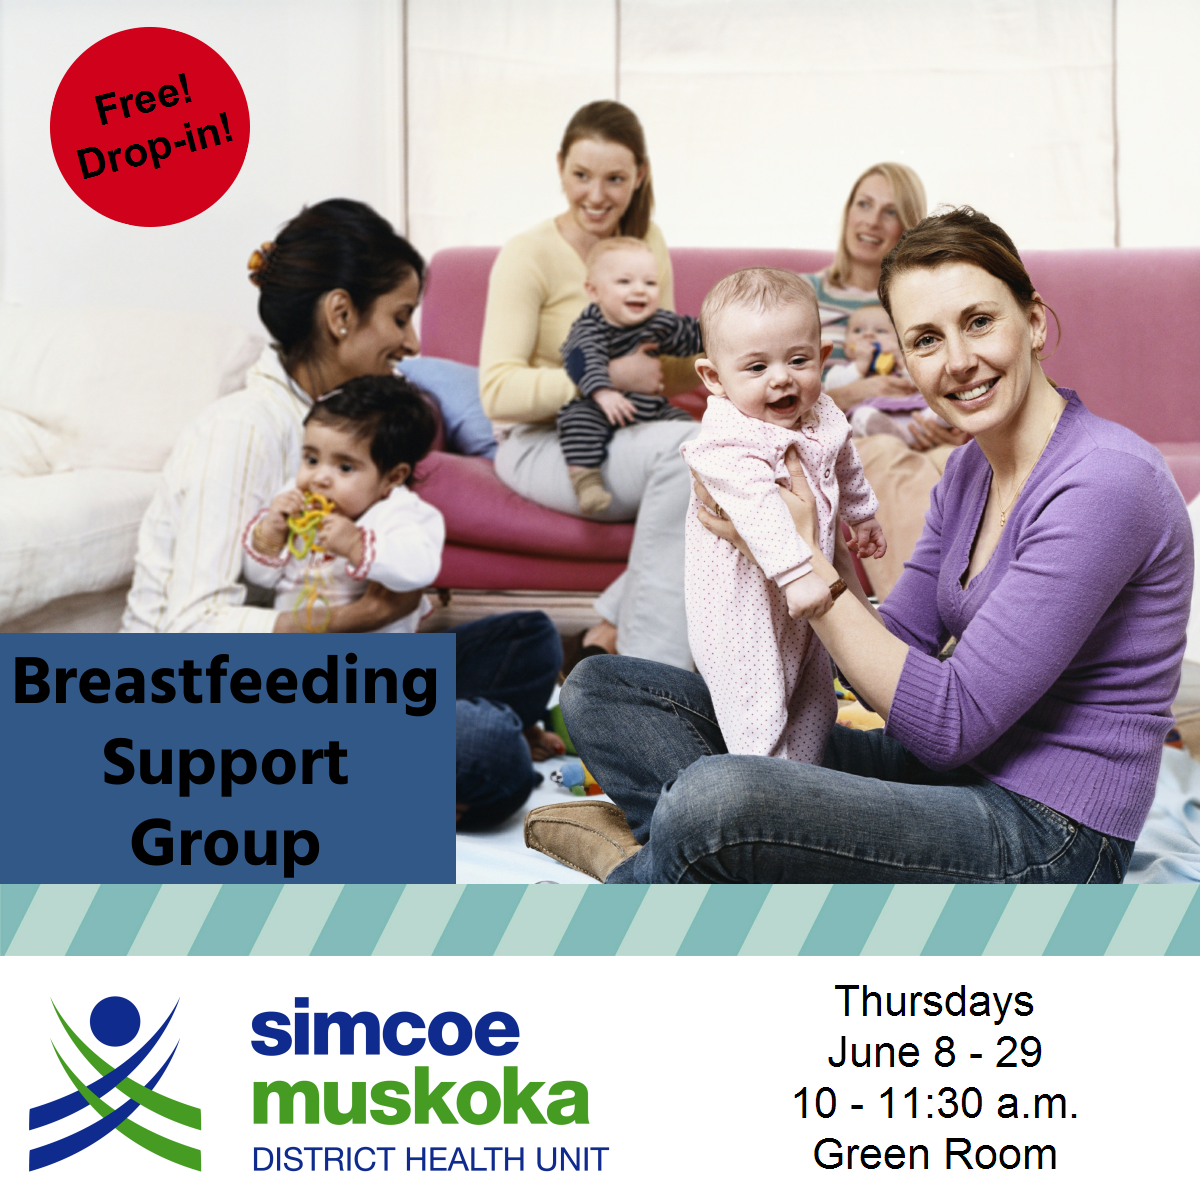 Group of women with babies sitting together at support group. 